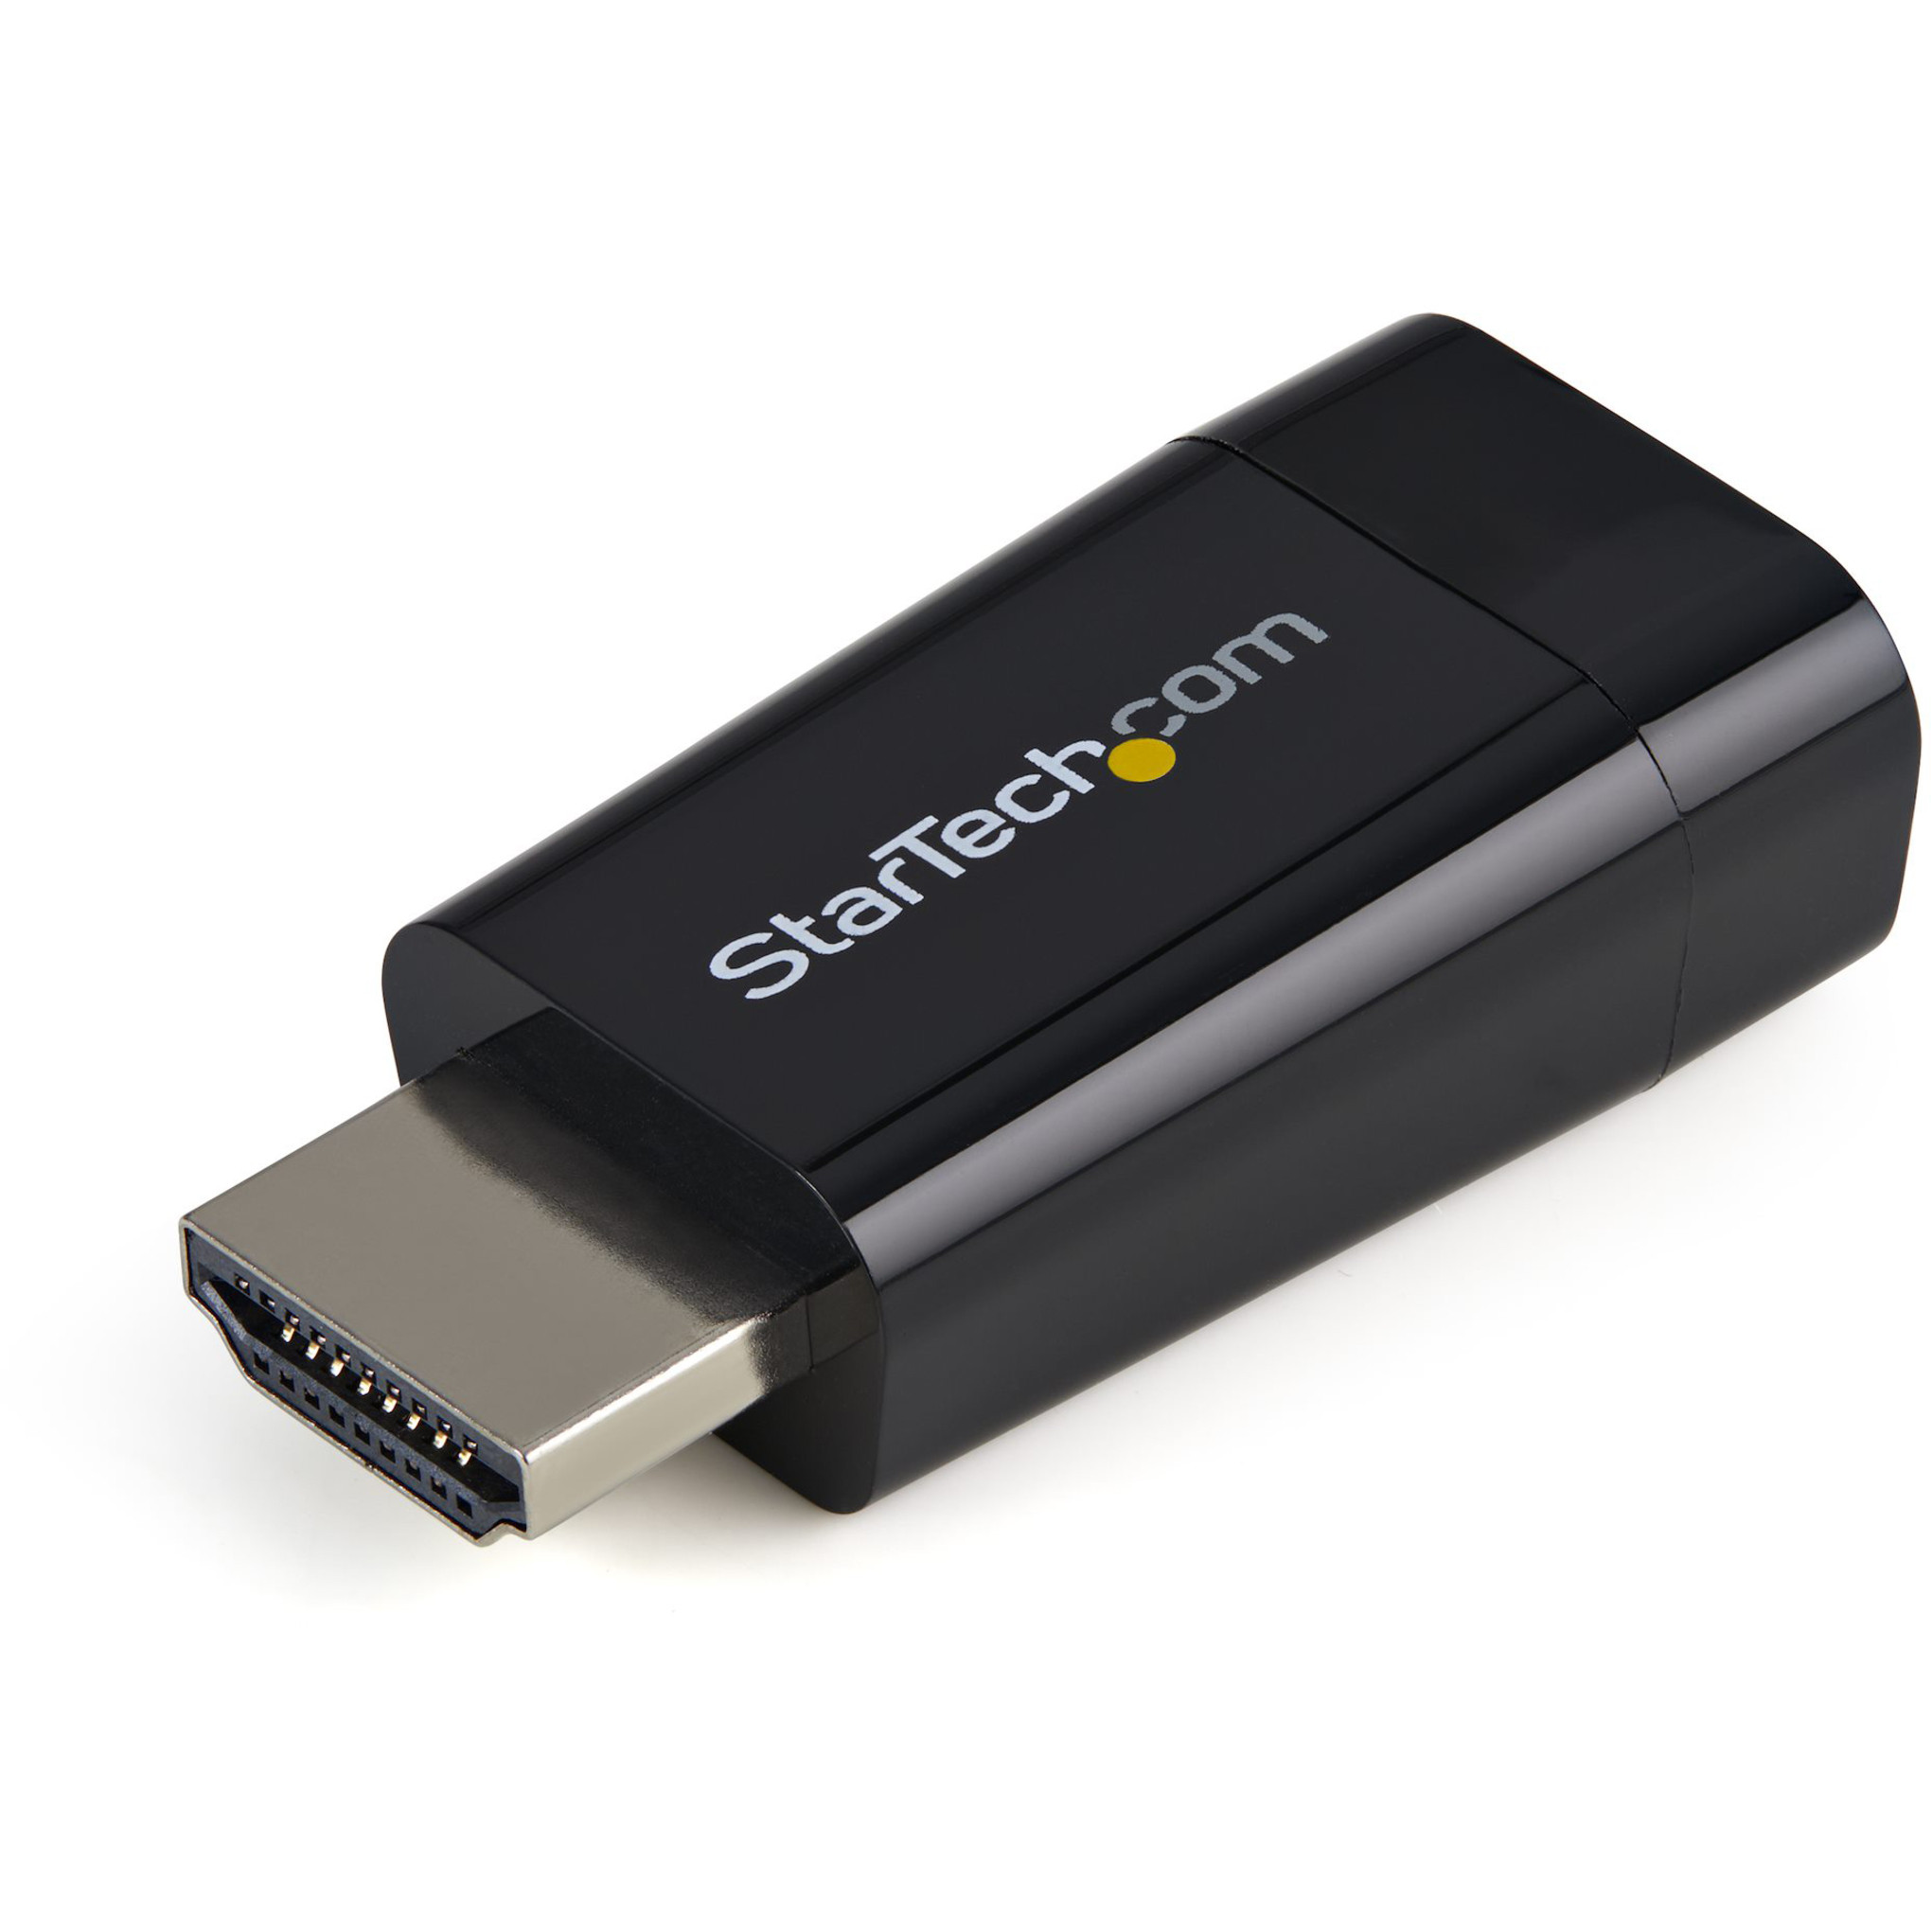 Startech .com Compact HDMI to VGA Adapter Converter1920x1200/1080pConnect an HDMI device/computer to a VGA monitor or projector, with t… HD2VGAMICRO